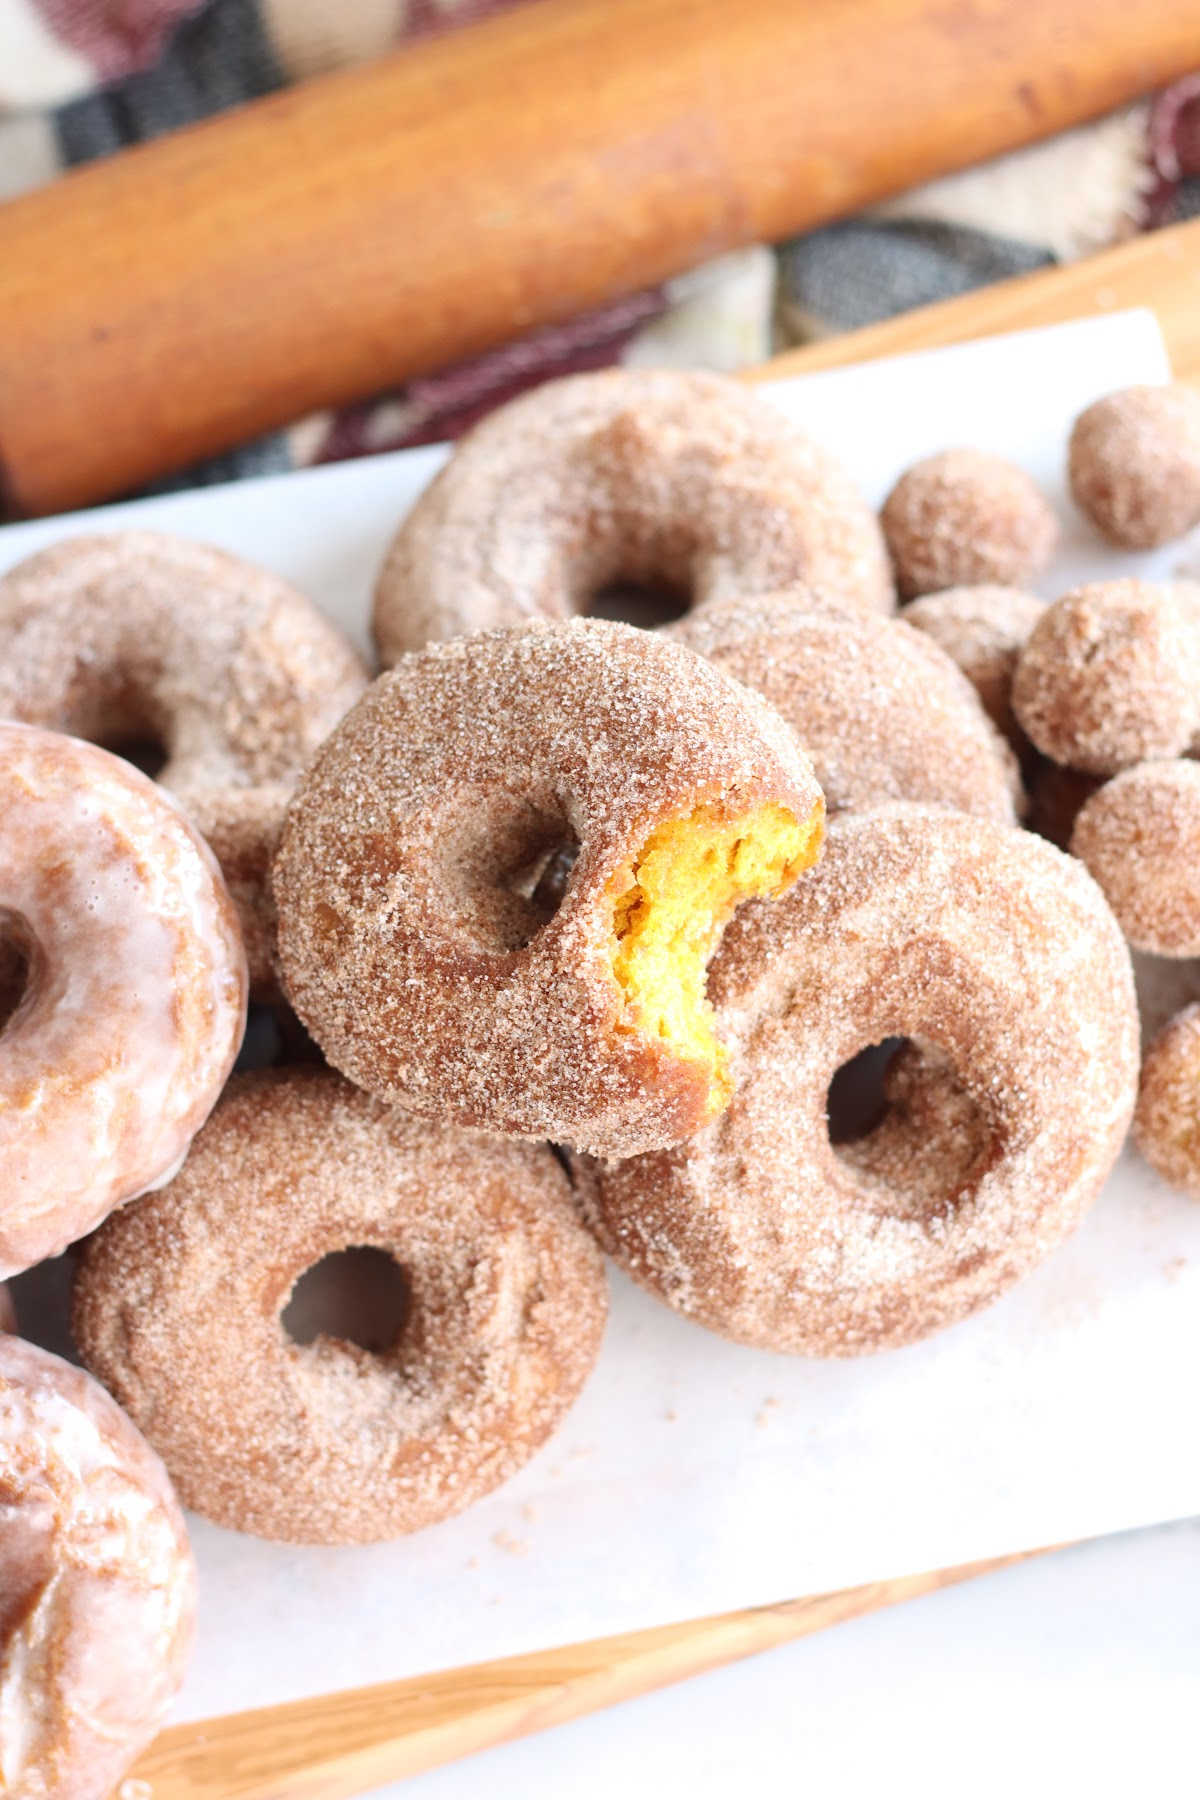 Pumpkin donuts with cinnamon sugar stacked on each other, one with bite.